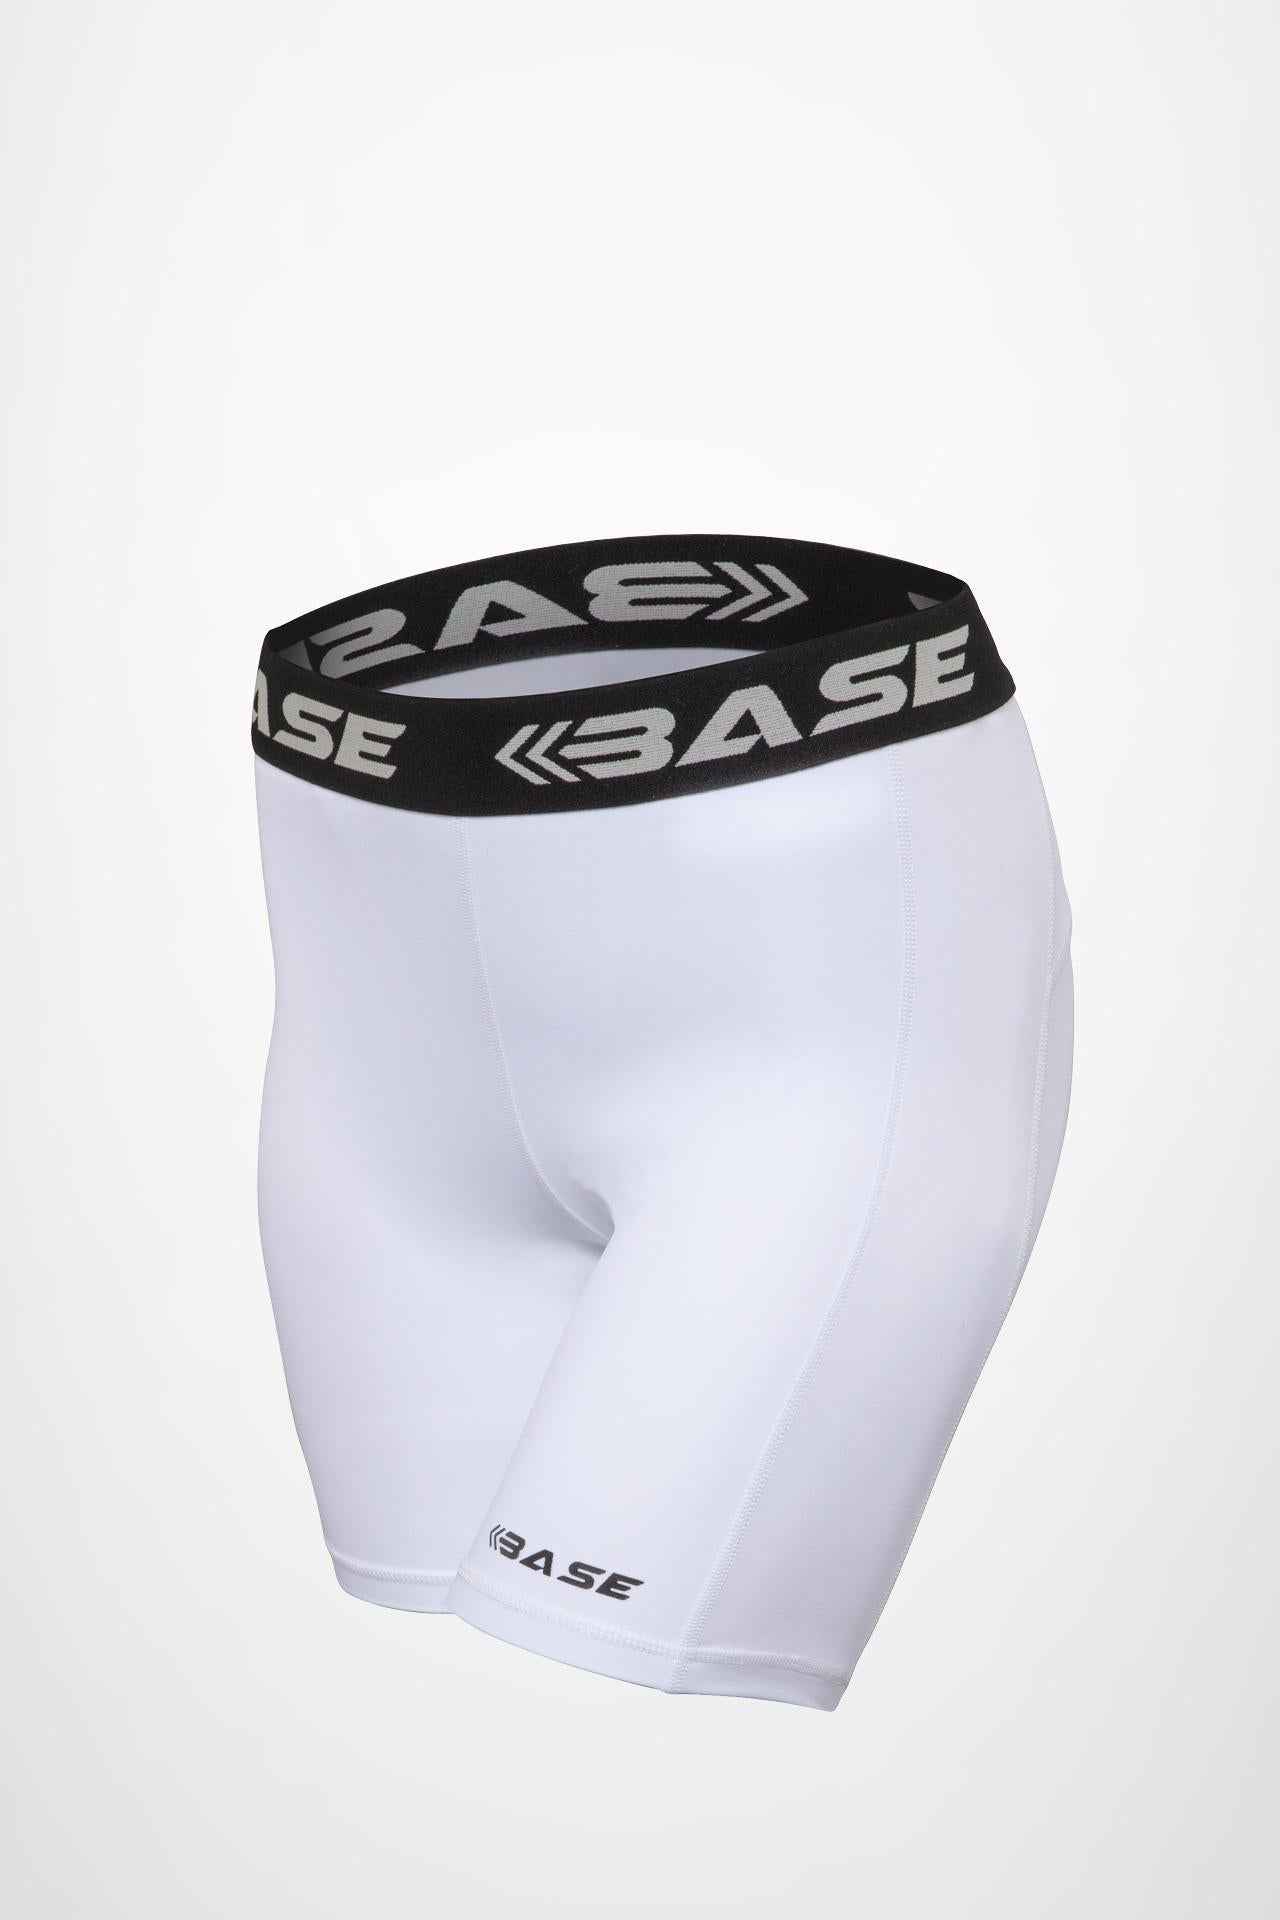 BASE Women's Compression Shorts - White - Adelaide 36ers